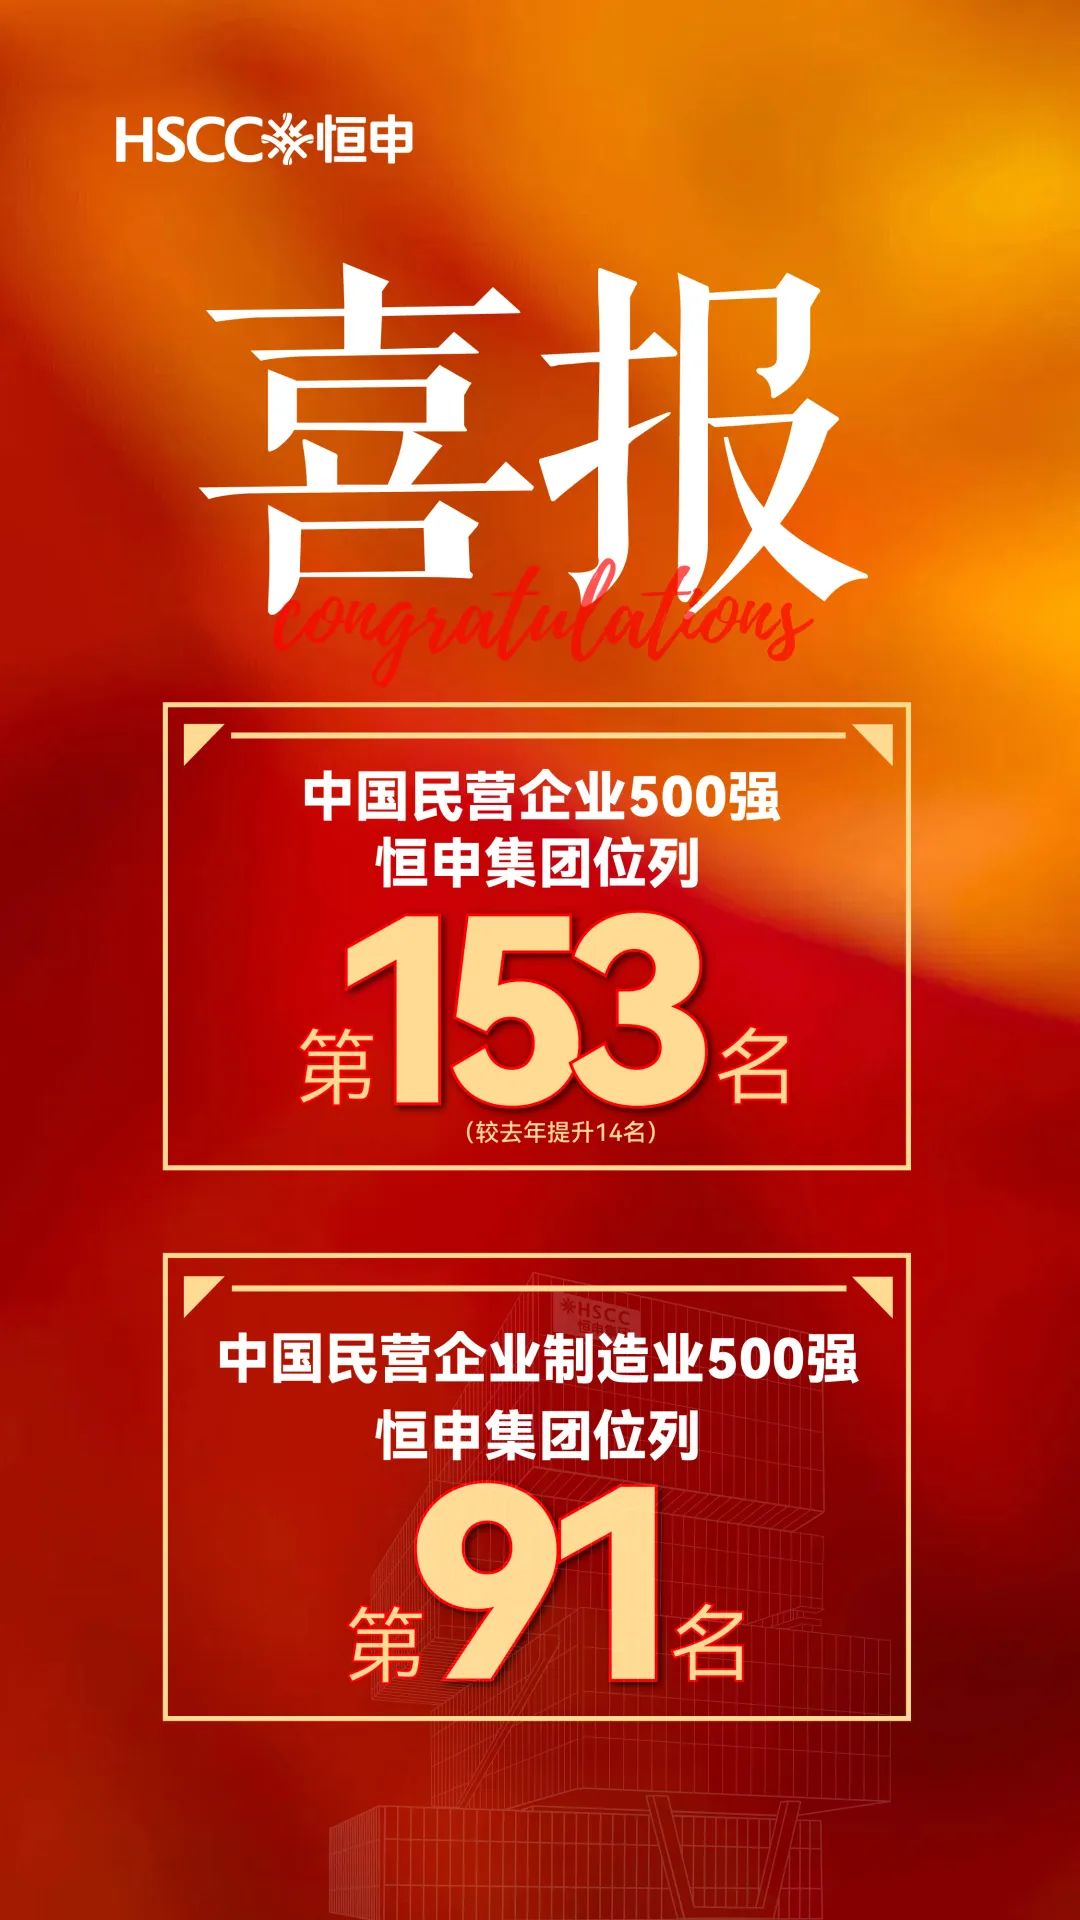  Highsun Group Ranked 153rd among the Top 500 Private Enterprises in China